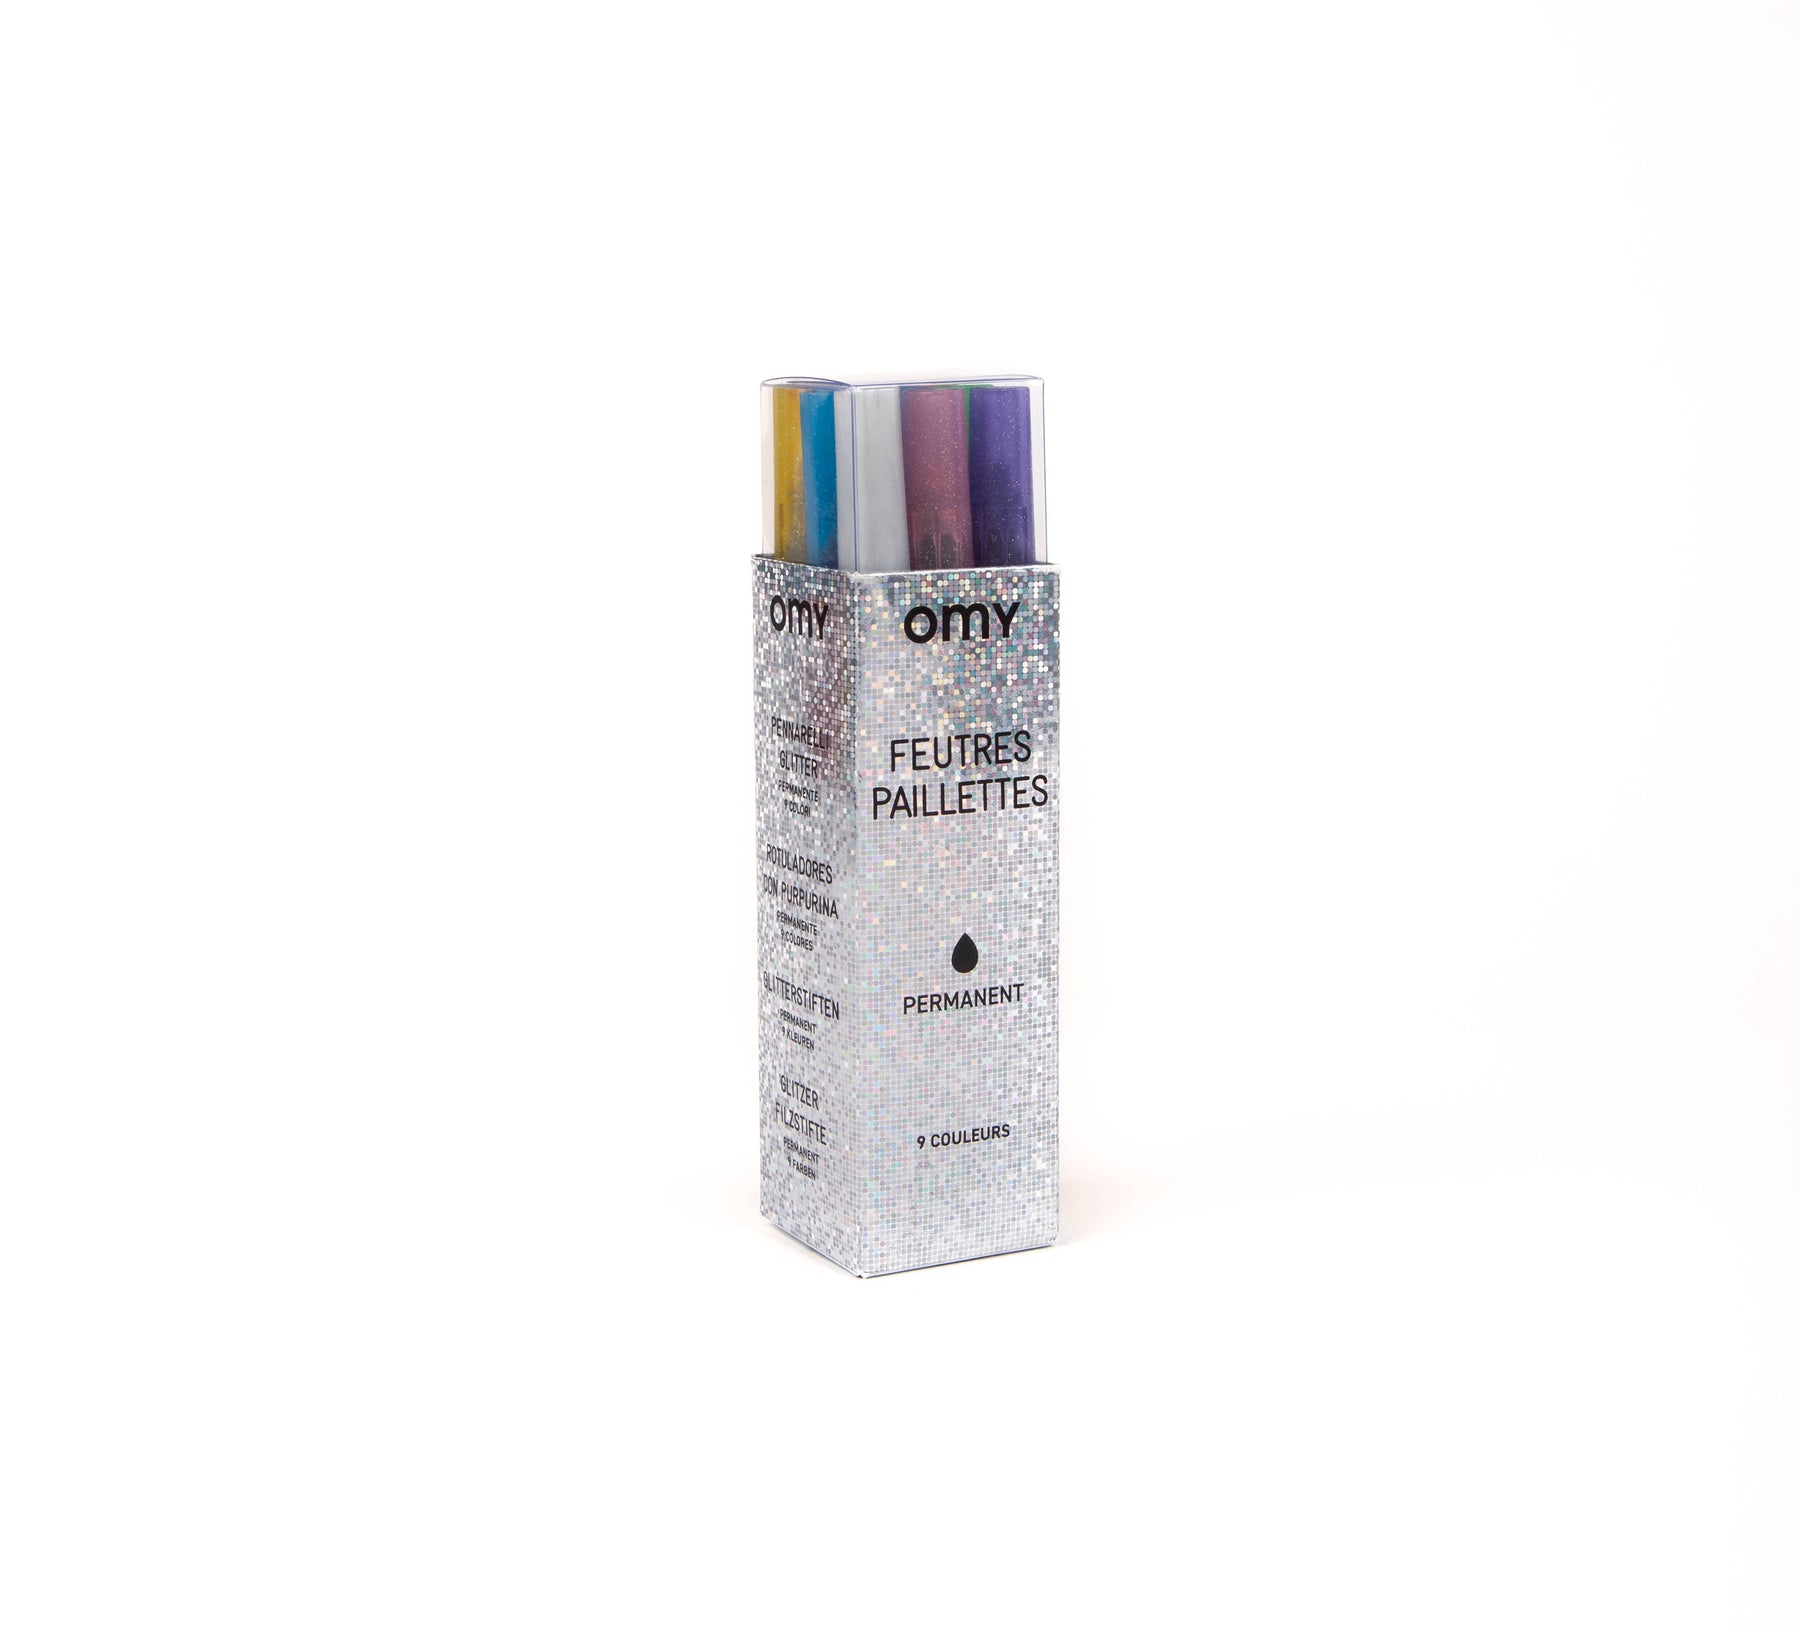 A box of glitter markers featuring shimmery colors for vibrant drawings. Includes 9 waterproof and sunroof glitter markers in blue, violet, yellow, silver, green, pink, and more.